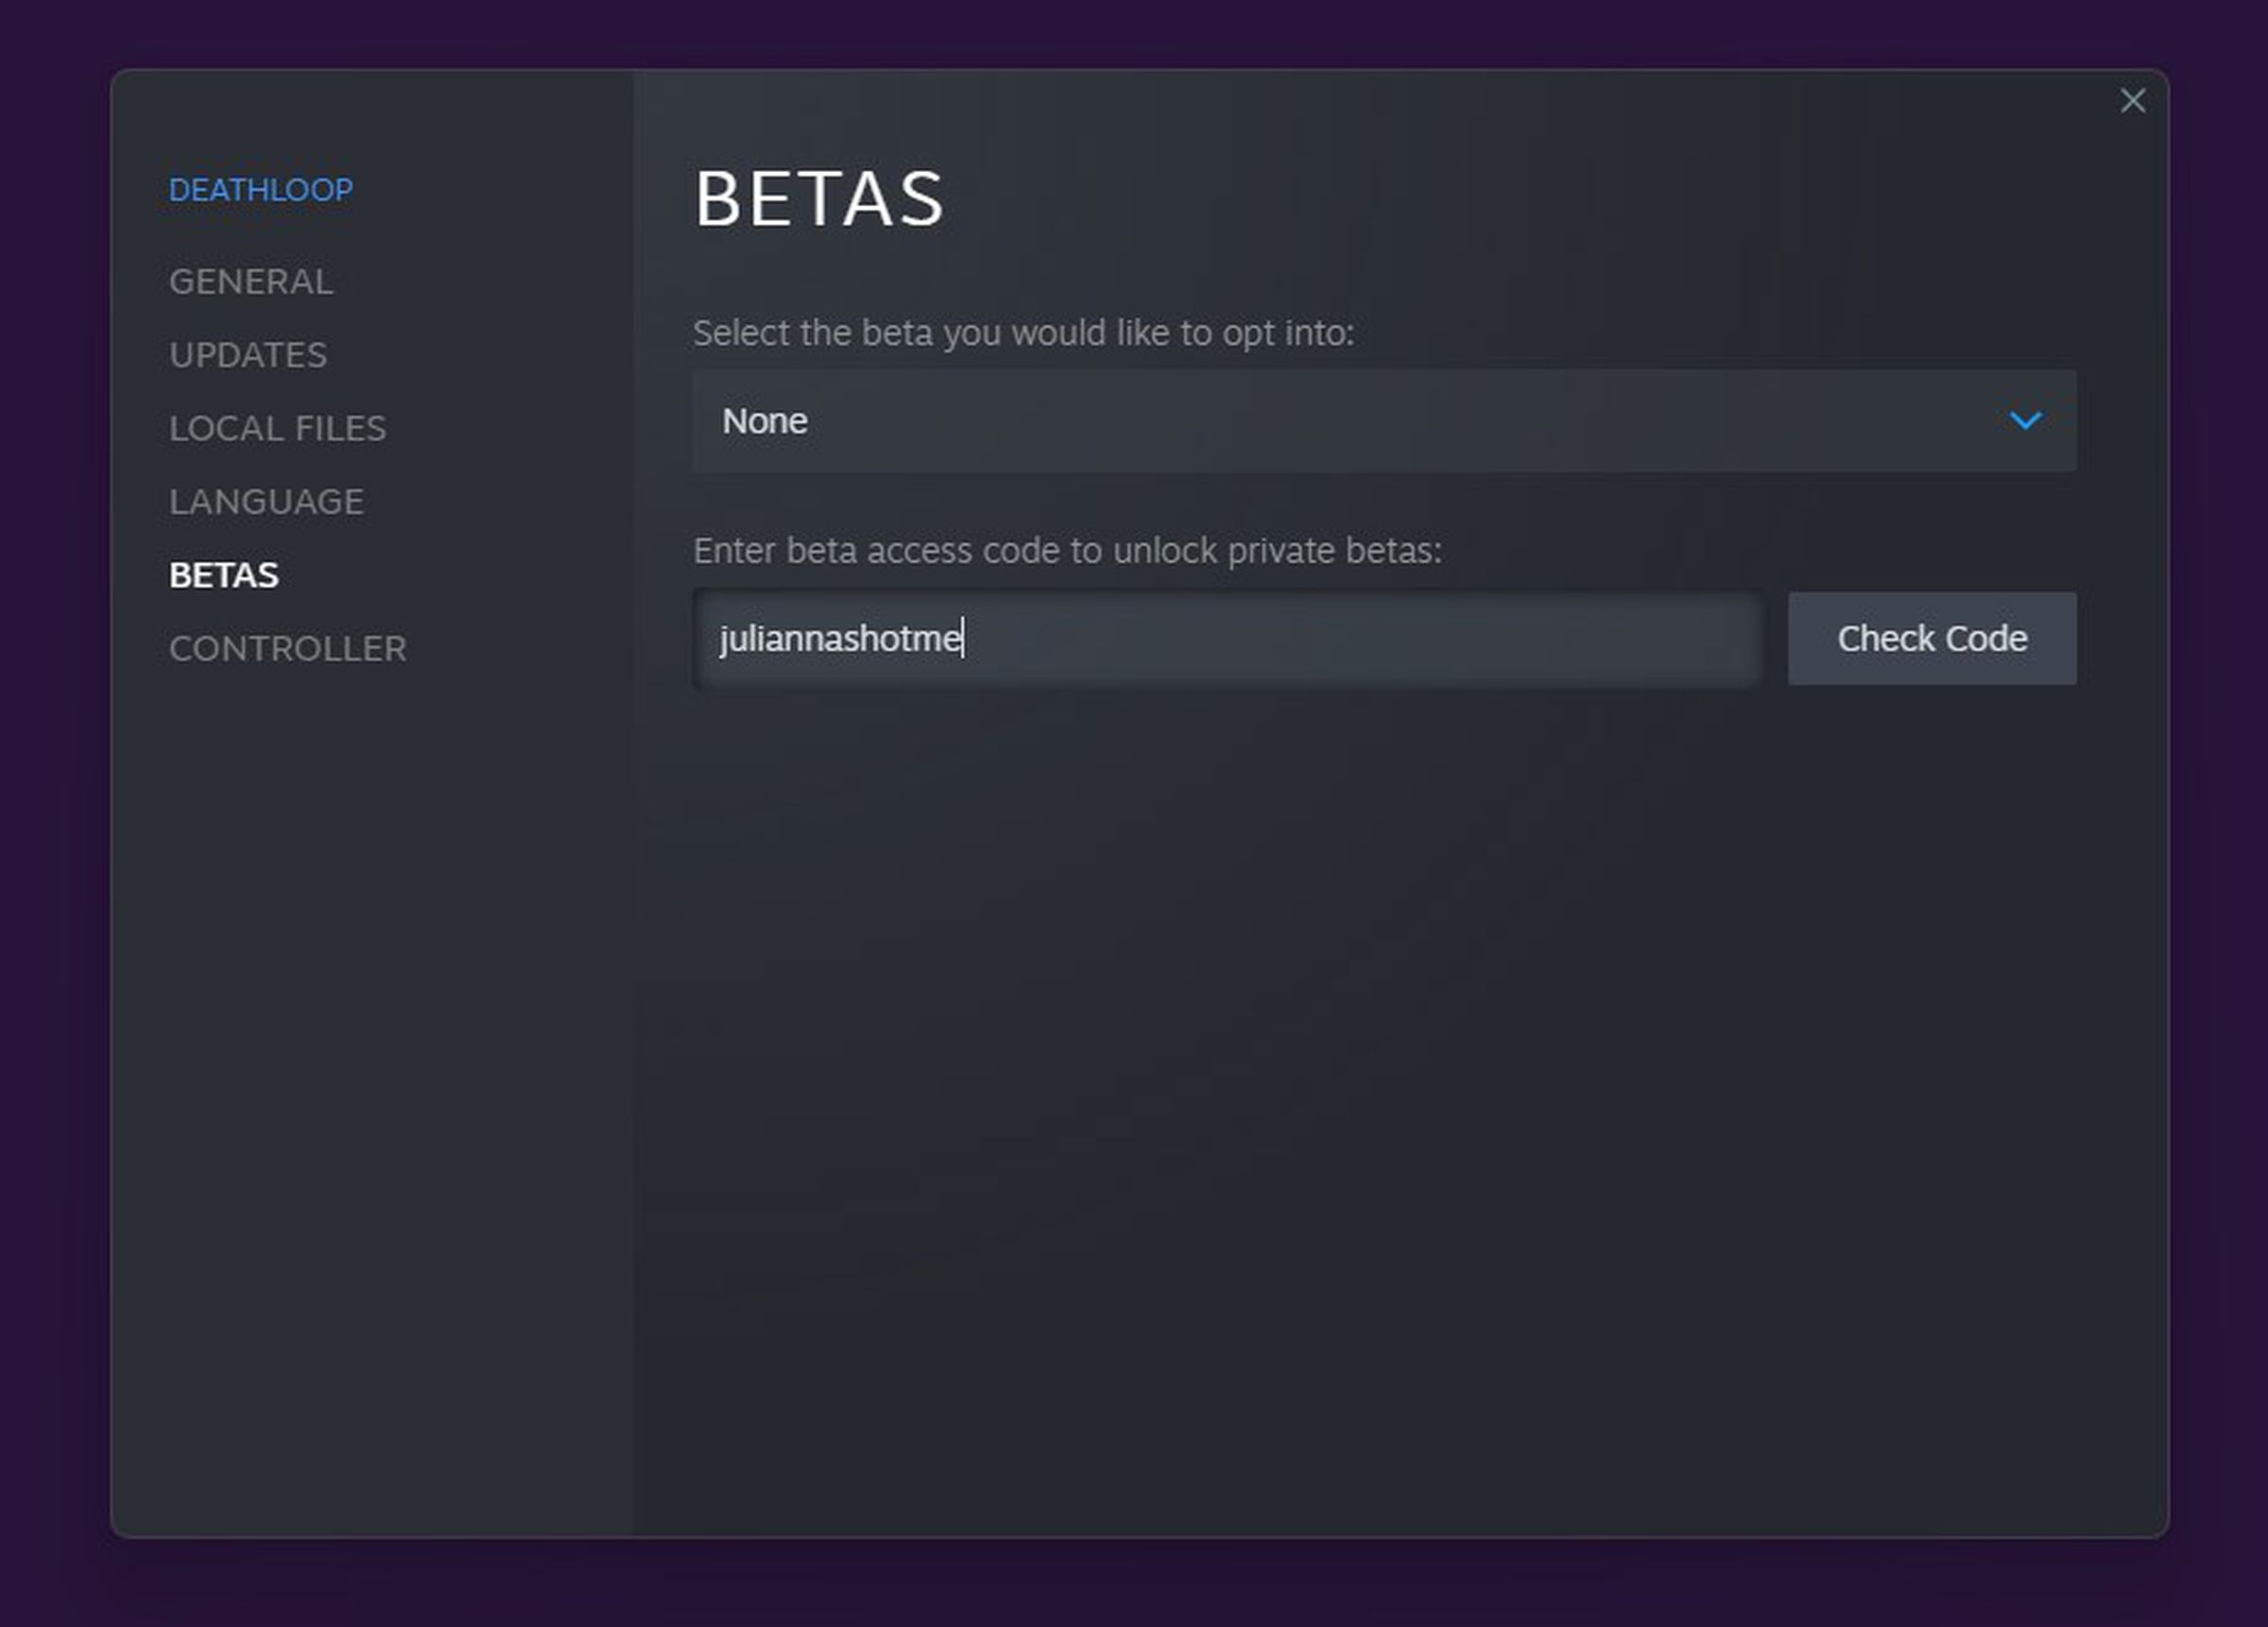 You’ll have to hit Check Code and also Opt into before the beta hotfix will work.